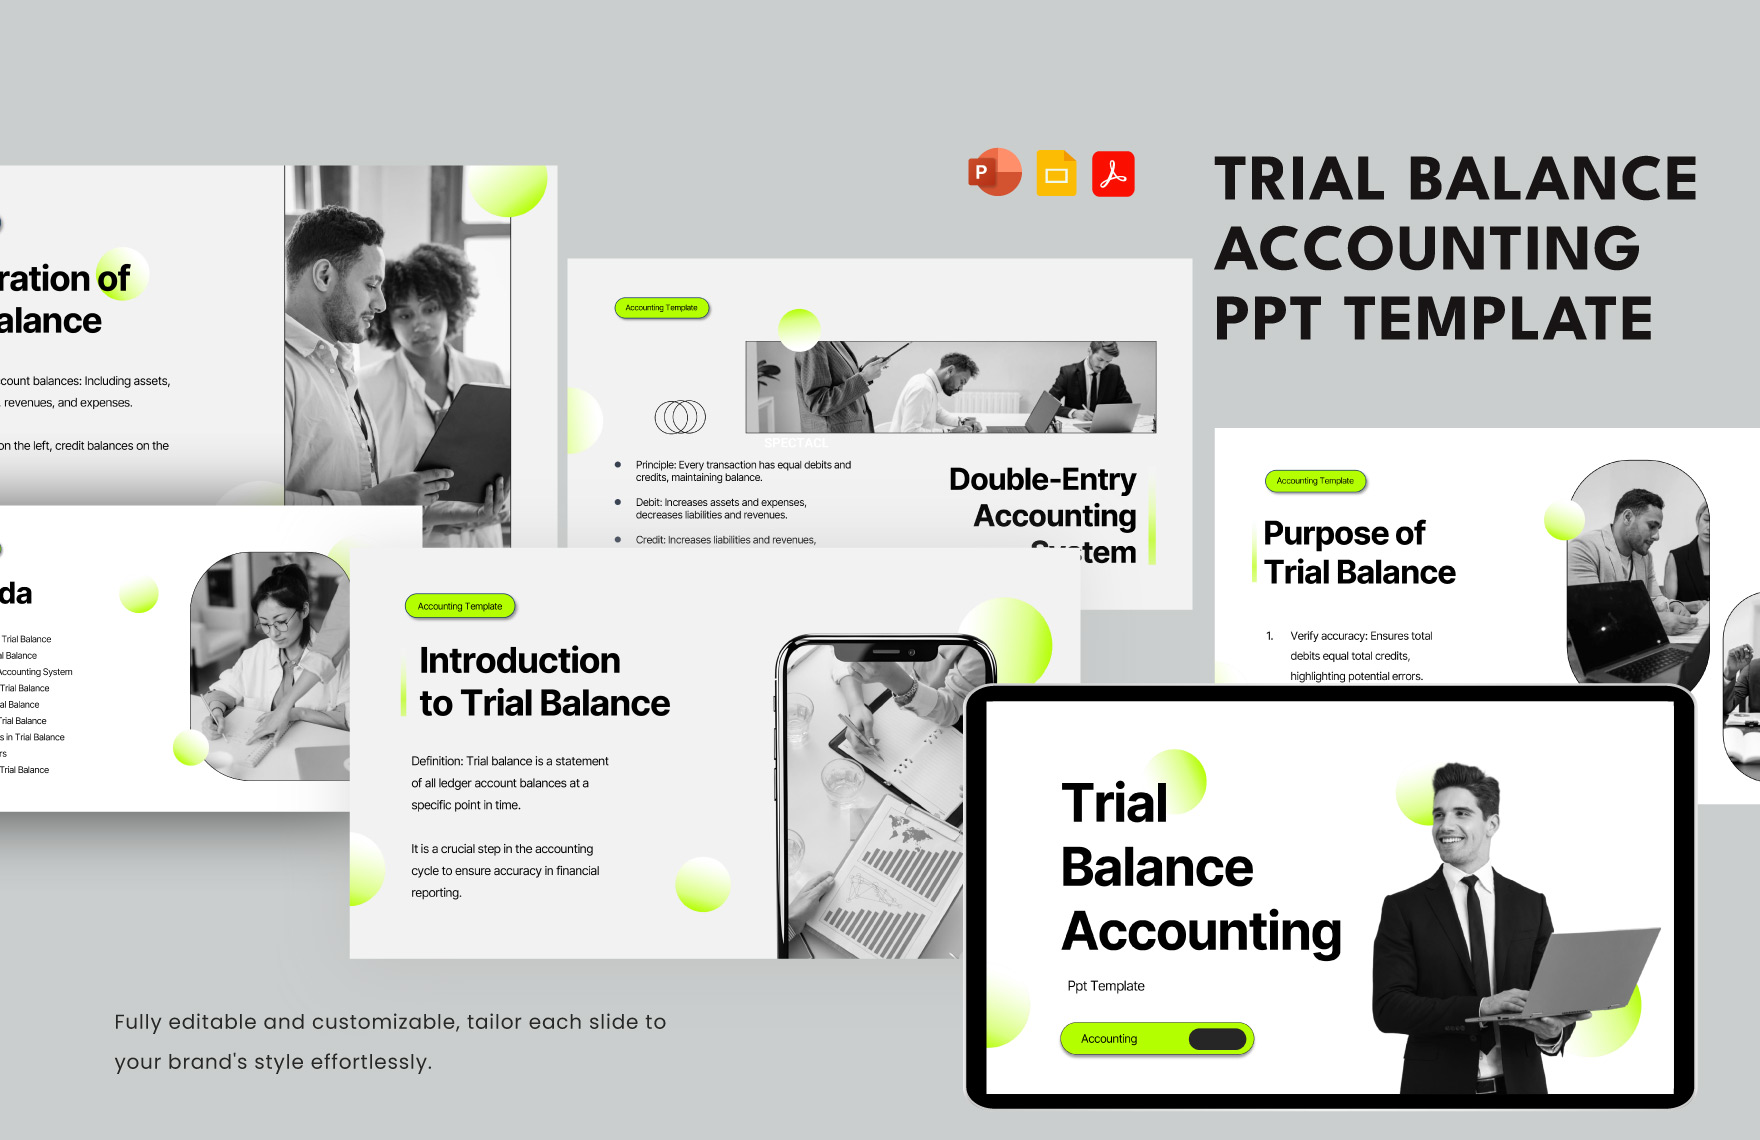 Trial Balance Accounting PPT Template